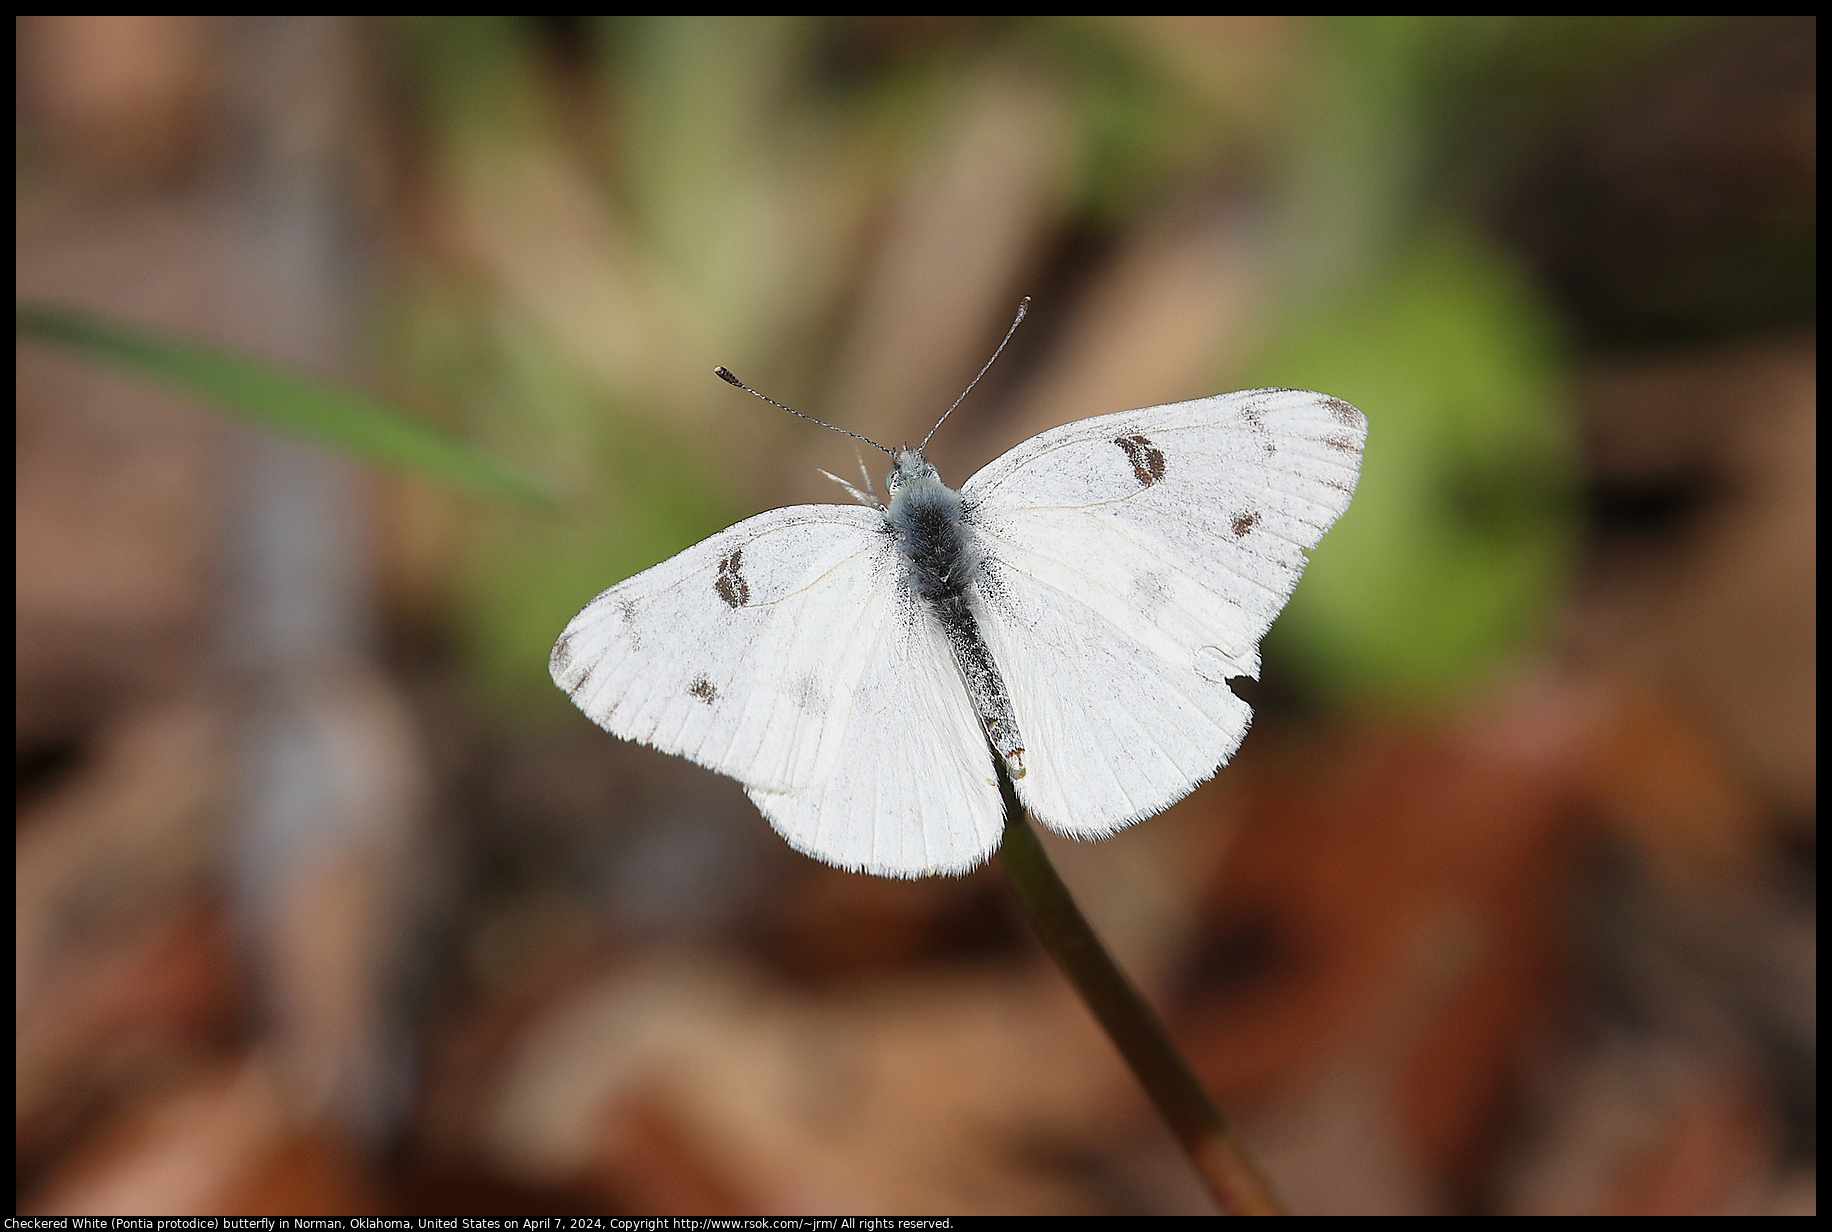 Checkered White (Pontia protodice) butterfly in Norman, Oklahoma, United States on April 7, 2024